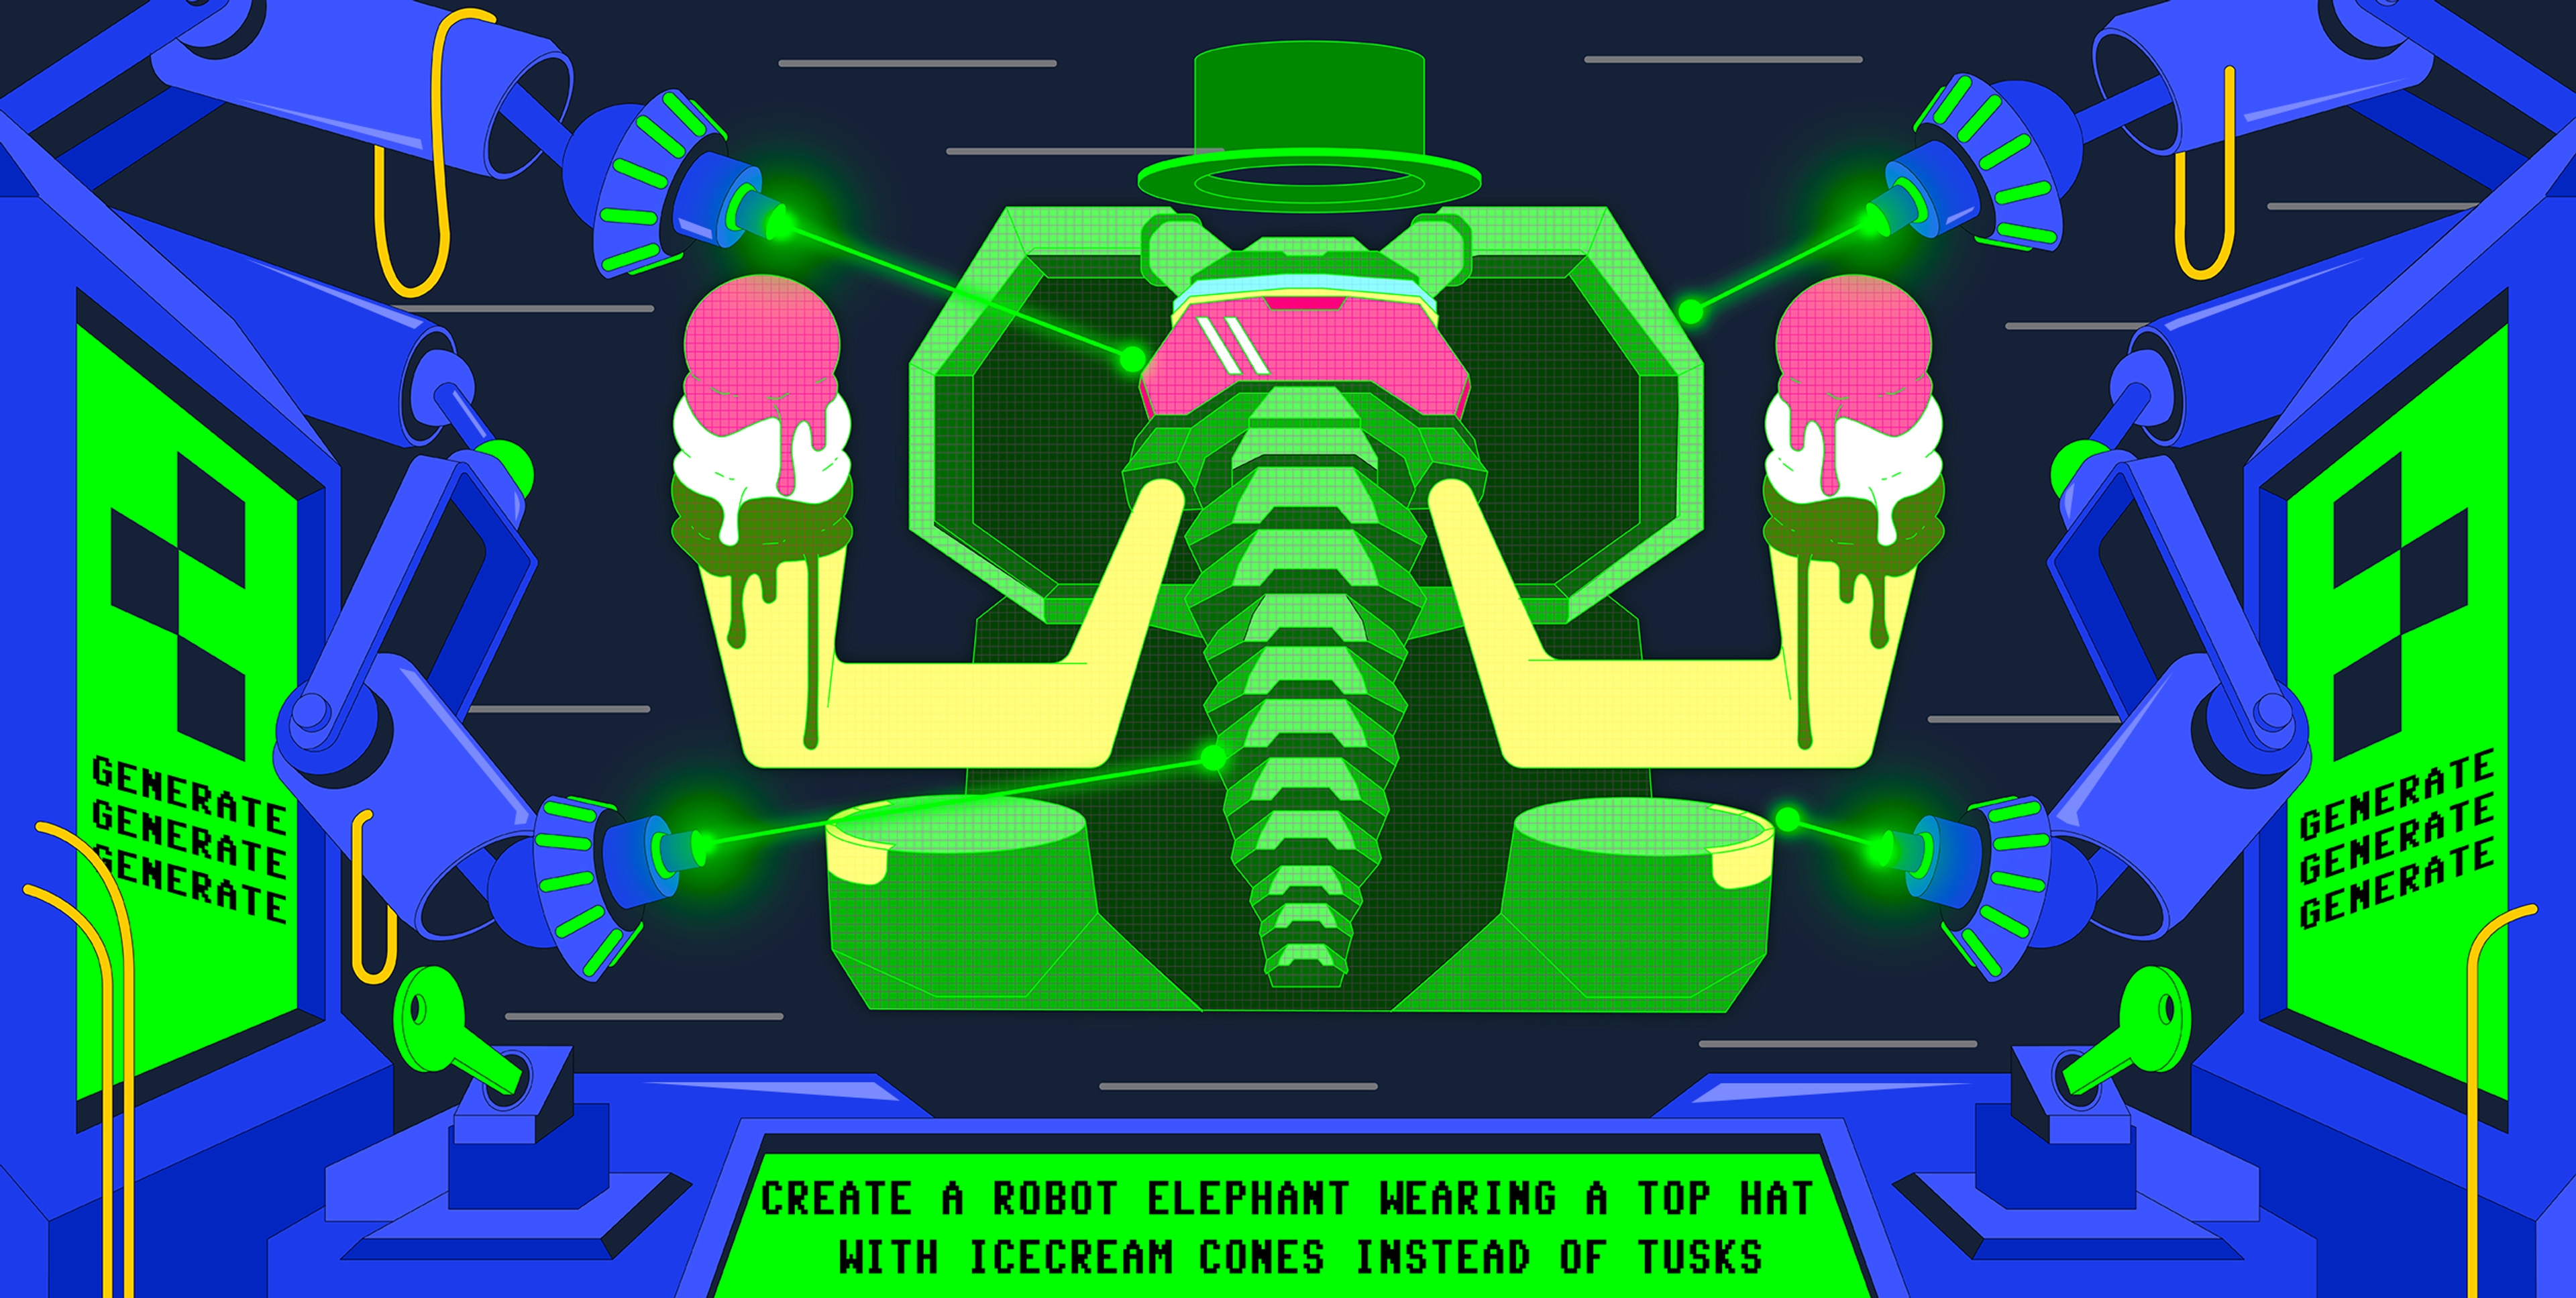 Cartoon illustration of generate code feature, showing a robot elephant wearing a top hat with icecream cones instead of tusks being generated by a machine